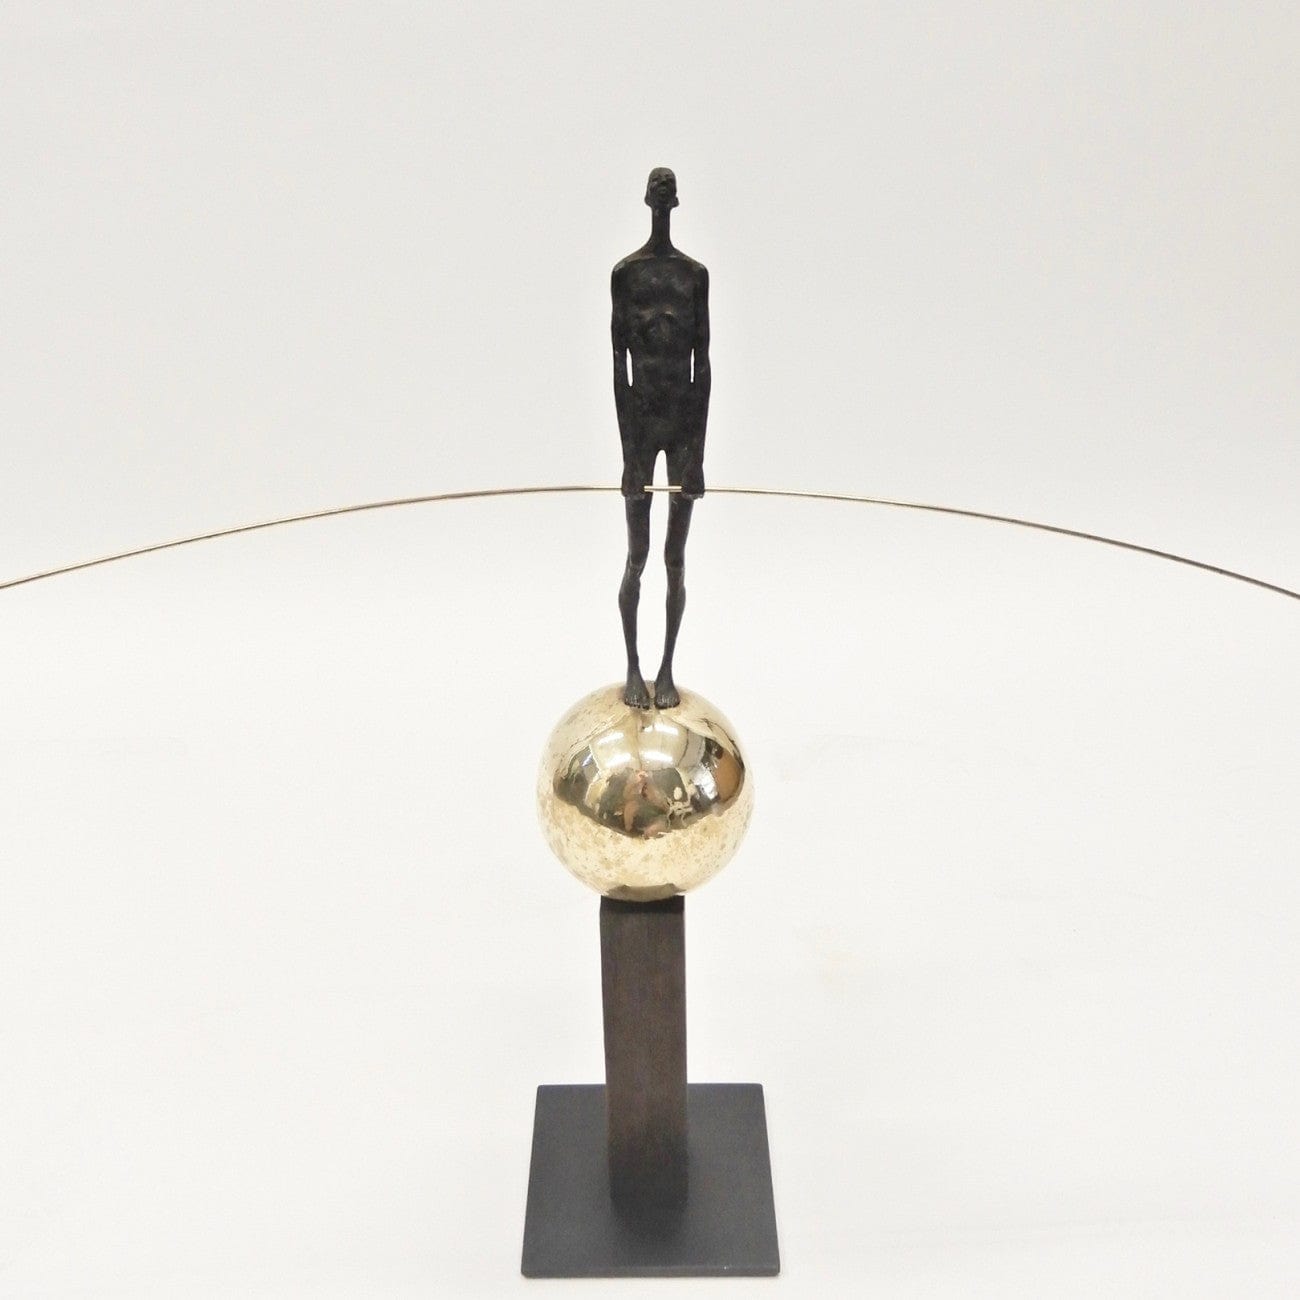 Eccotrading Design London Accessories Bronze Figure On Sphere With Stick House of Isabella UK